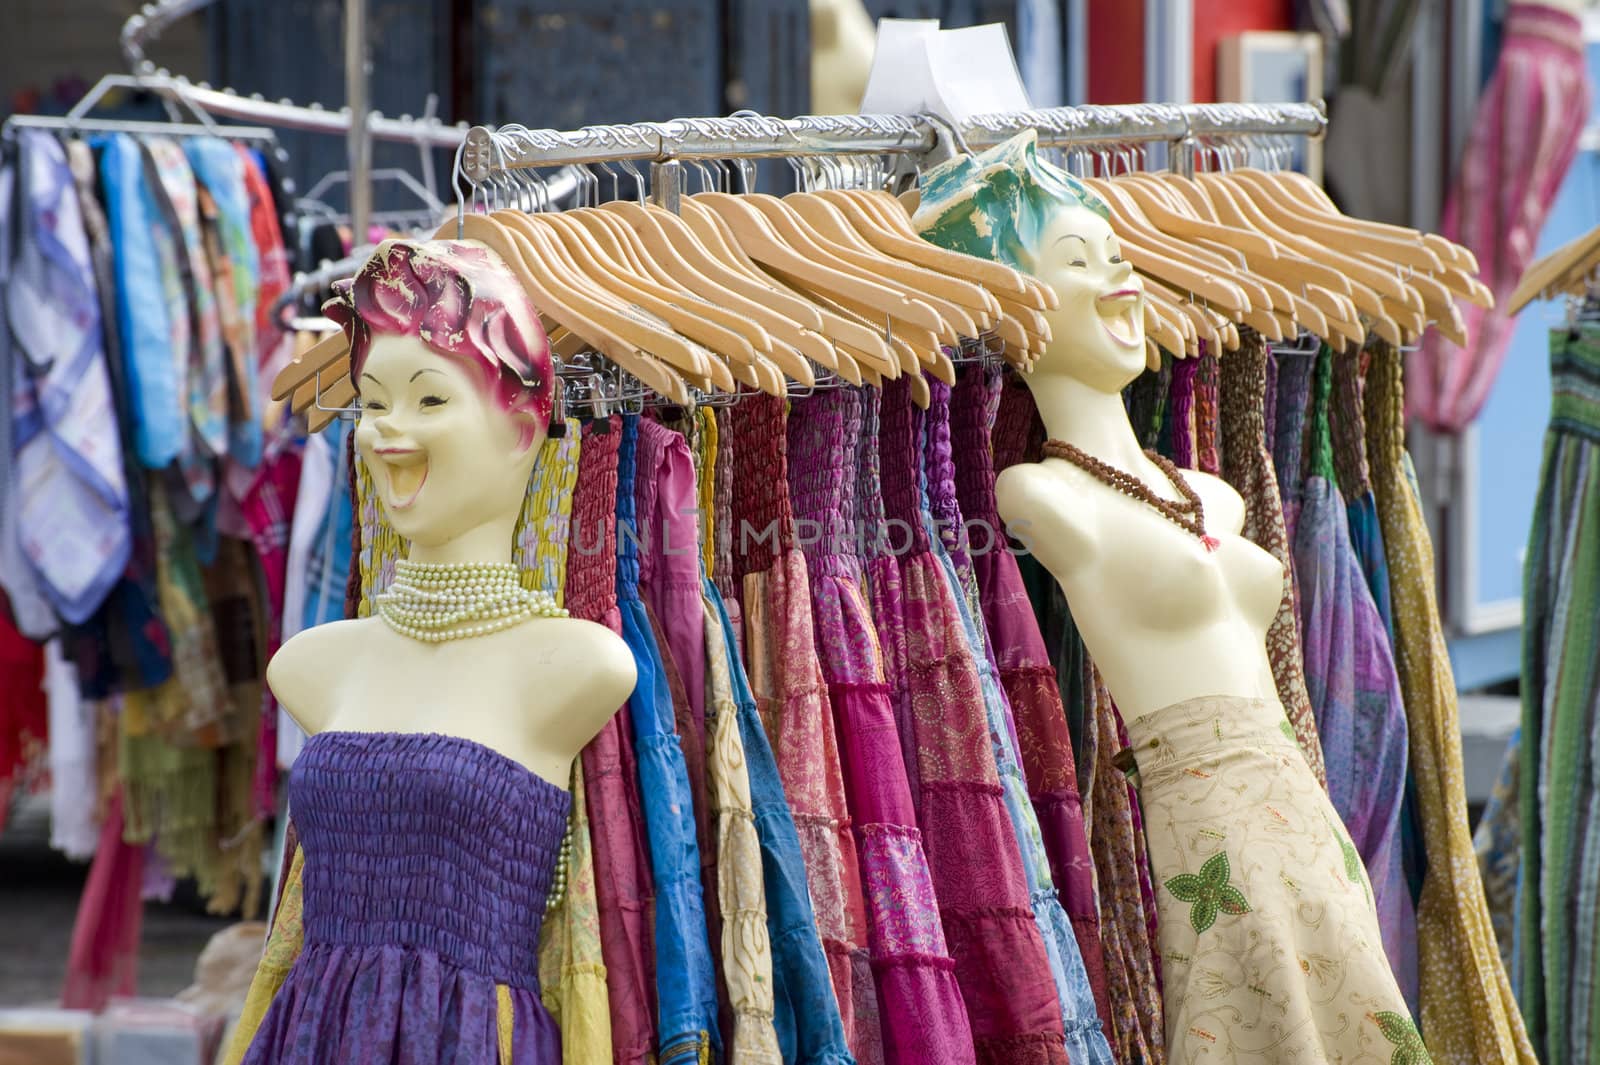 Dummy and clothes inthe dress market in Denmark